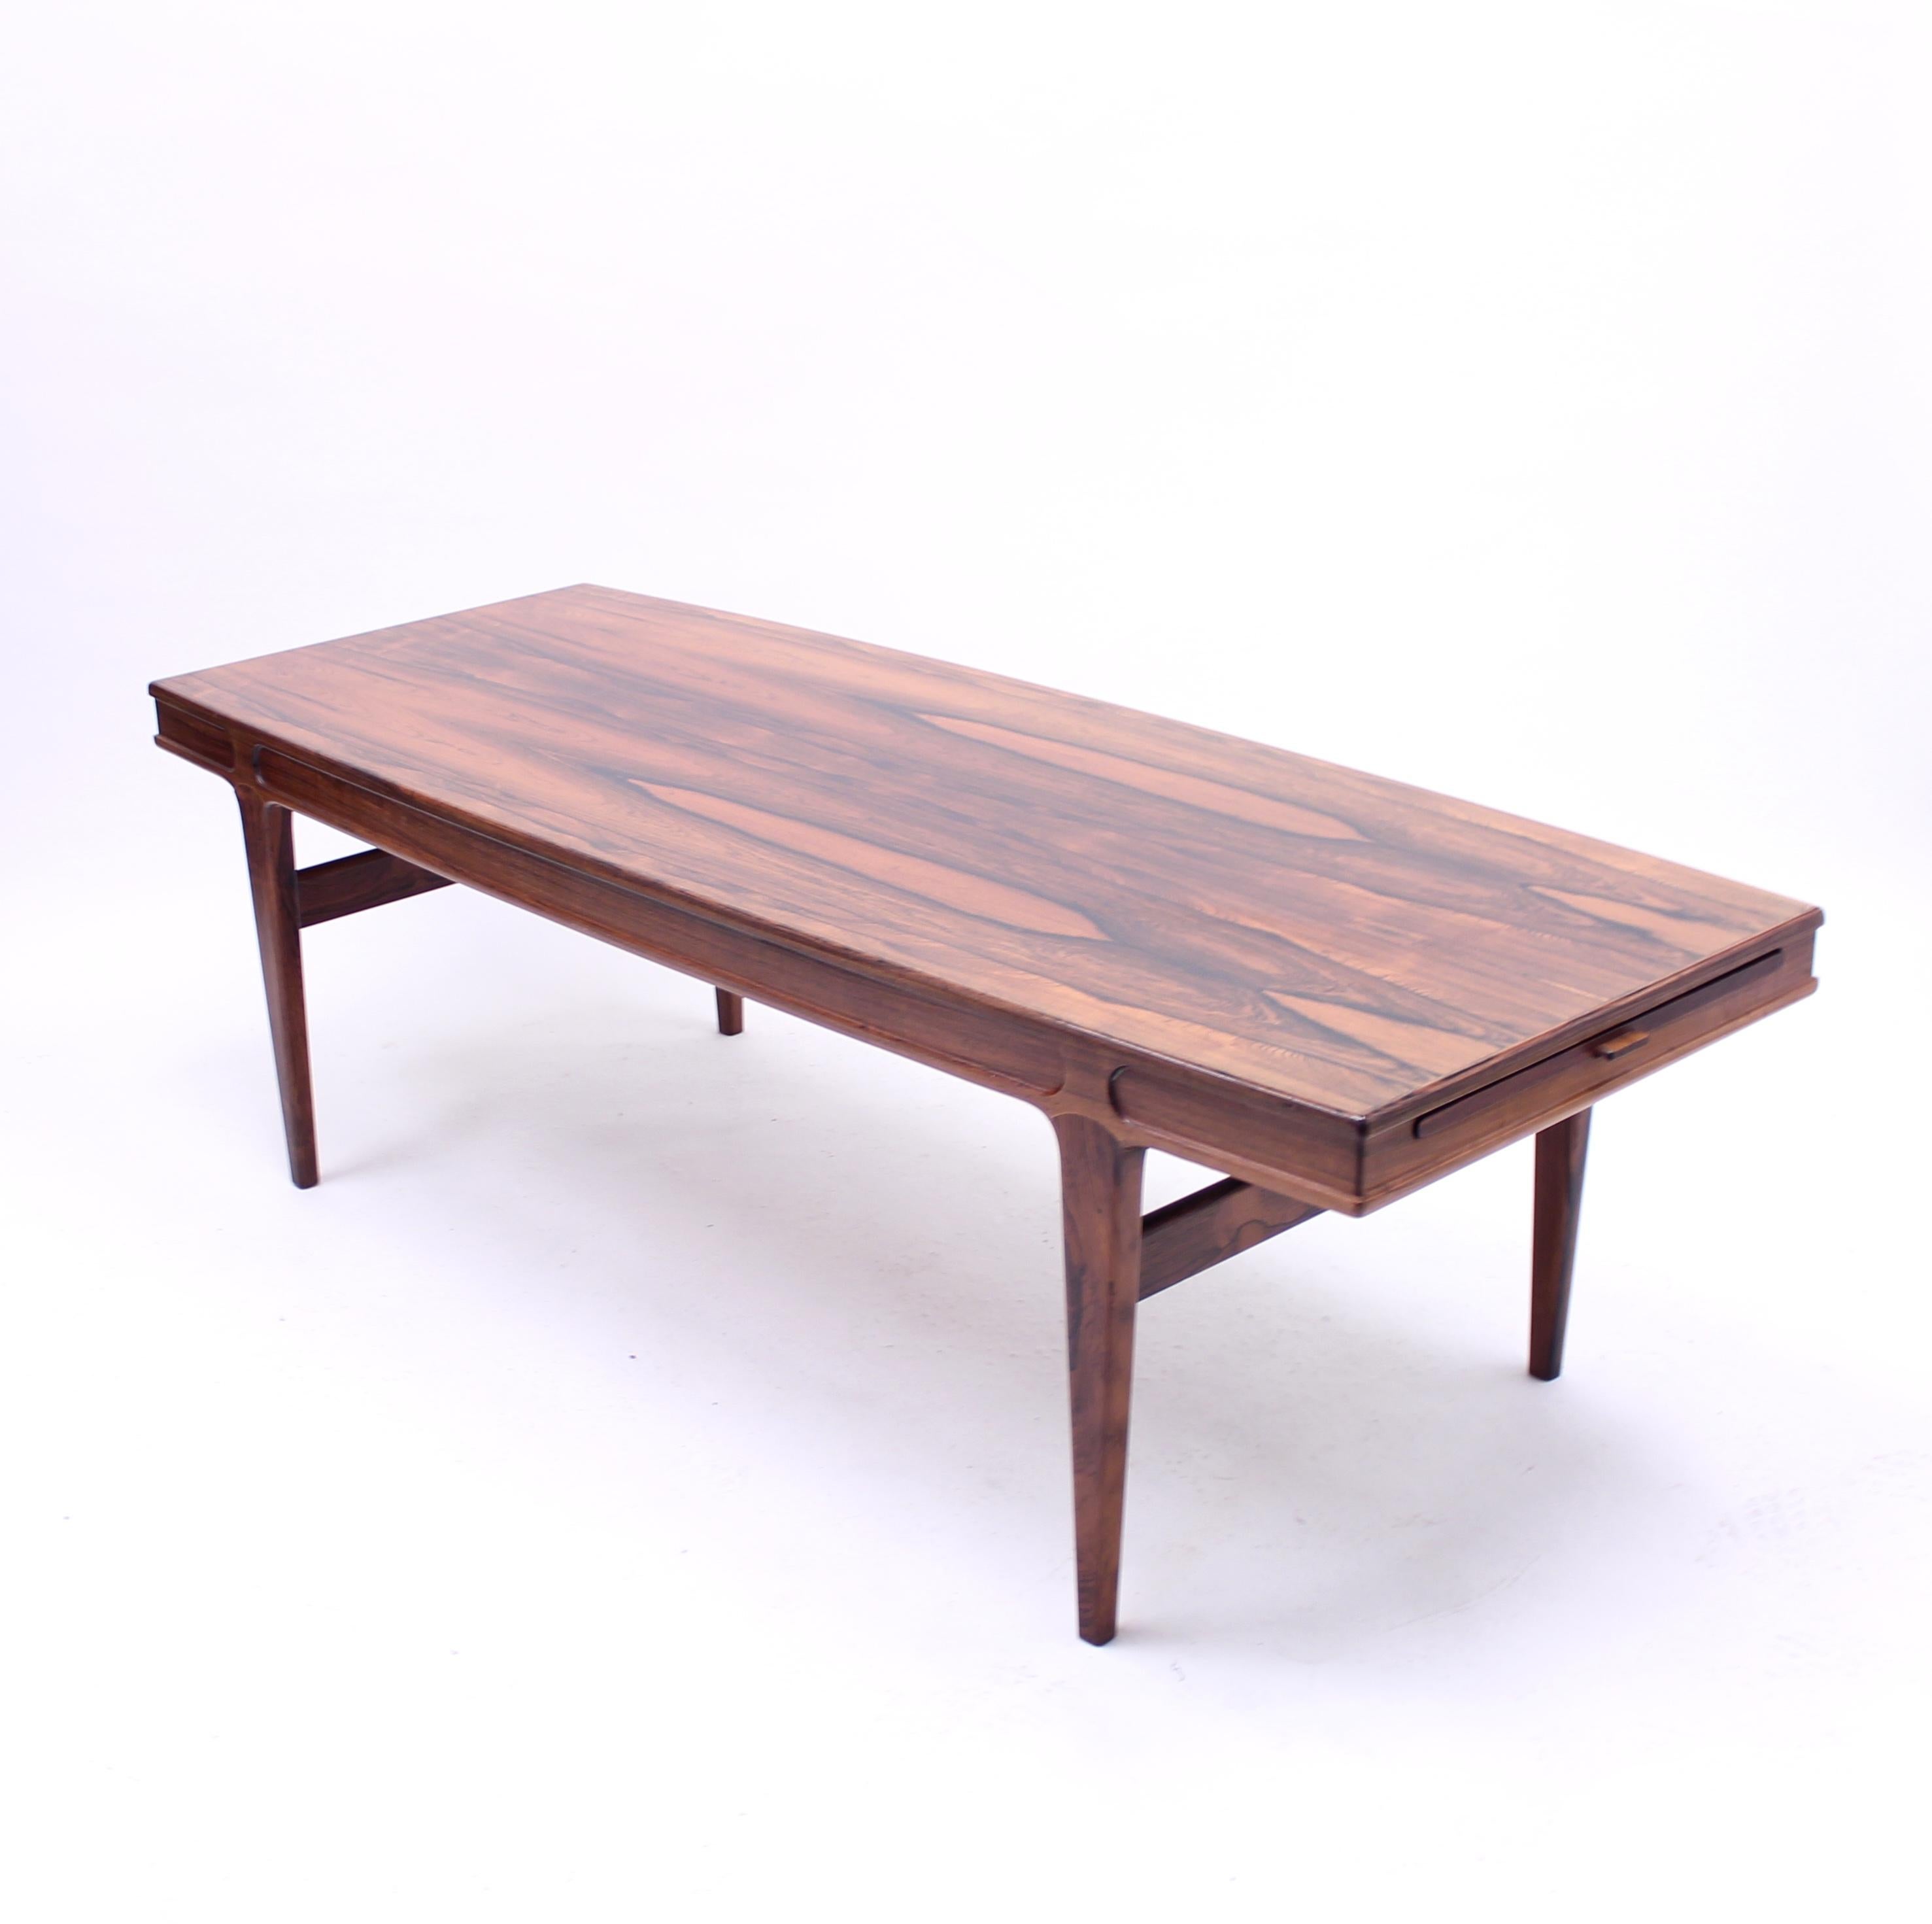 Rosewood coffee table designed by Johannes Andersen for Trensum in the 1960s. This model has two extra leafs with a black laminate top that could be pulled out from the short sides of the table. Length is there for 160-222 cm. Very good untouched